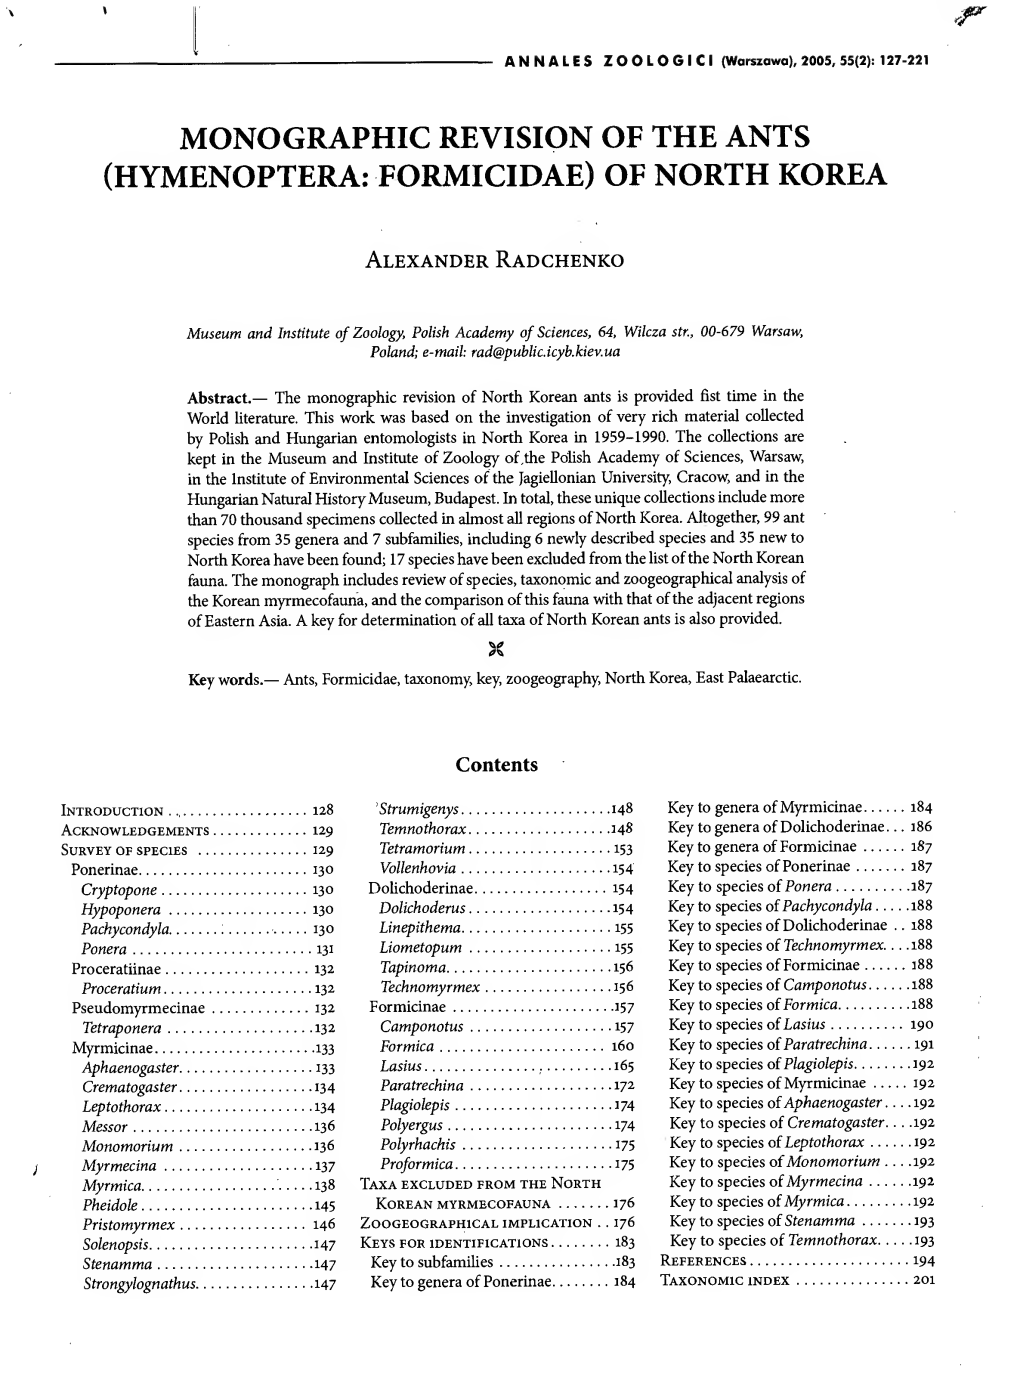 Monographic Revision of the Ants (Hymenoptera, Formicidae) of North